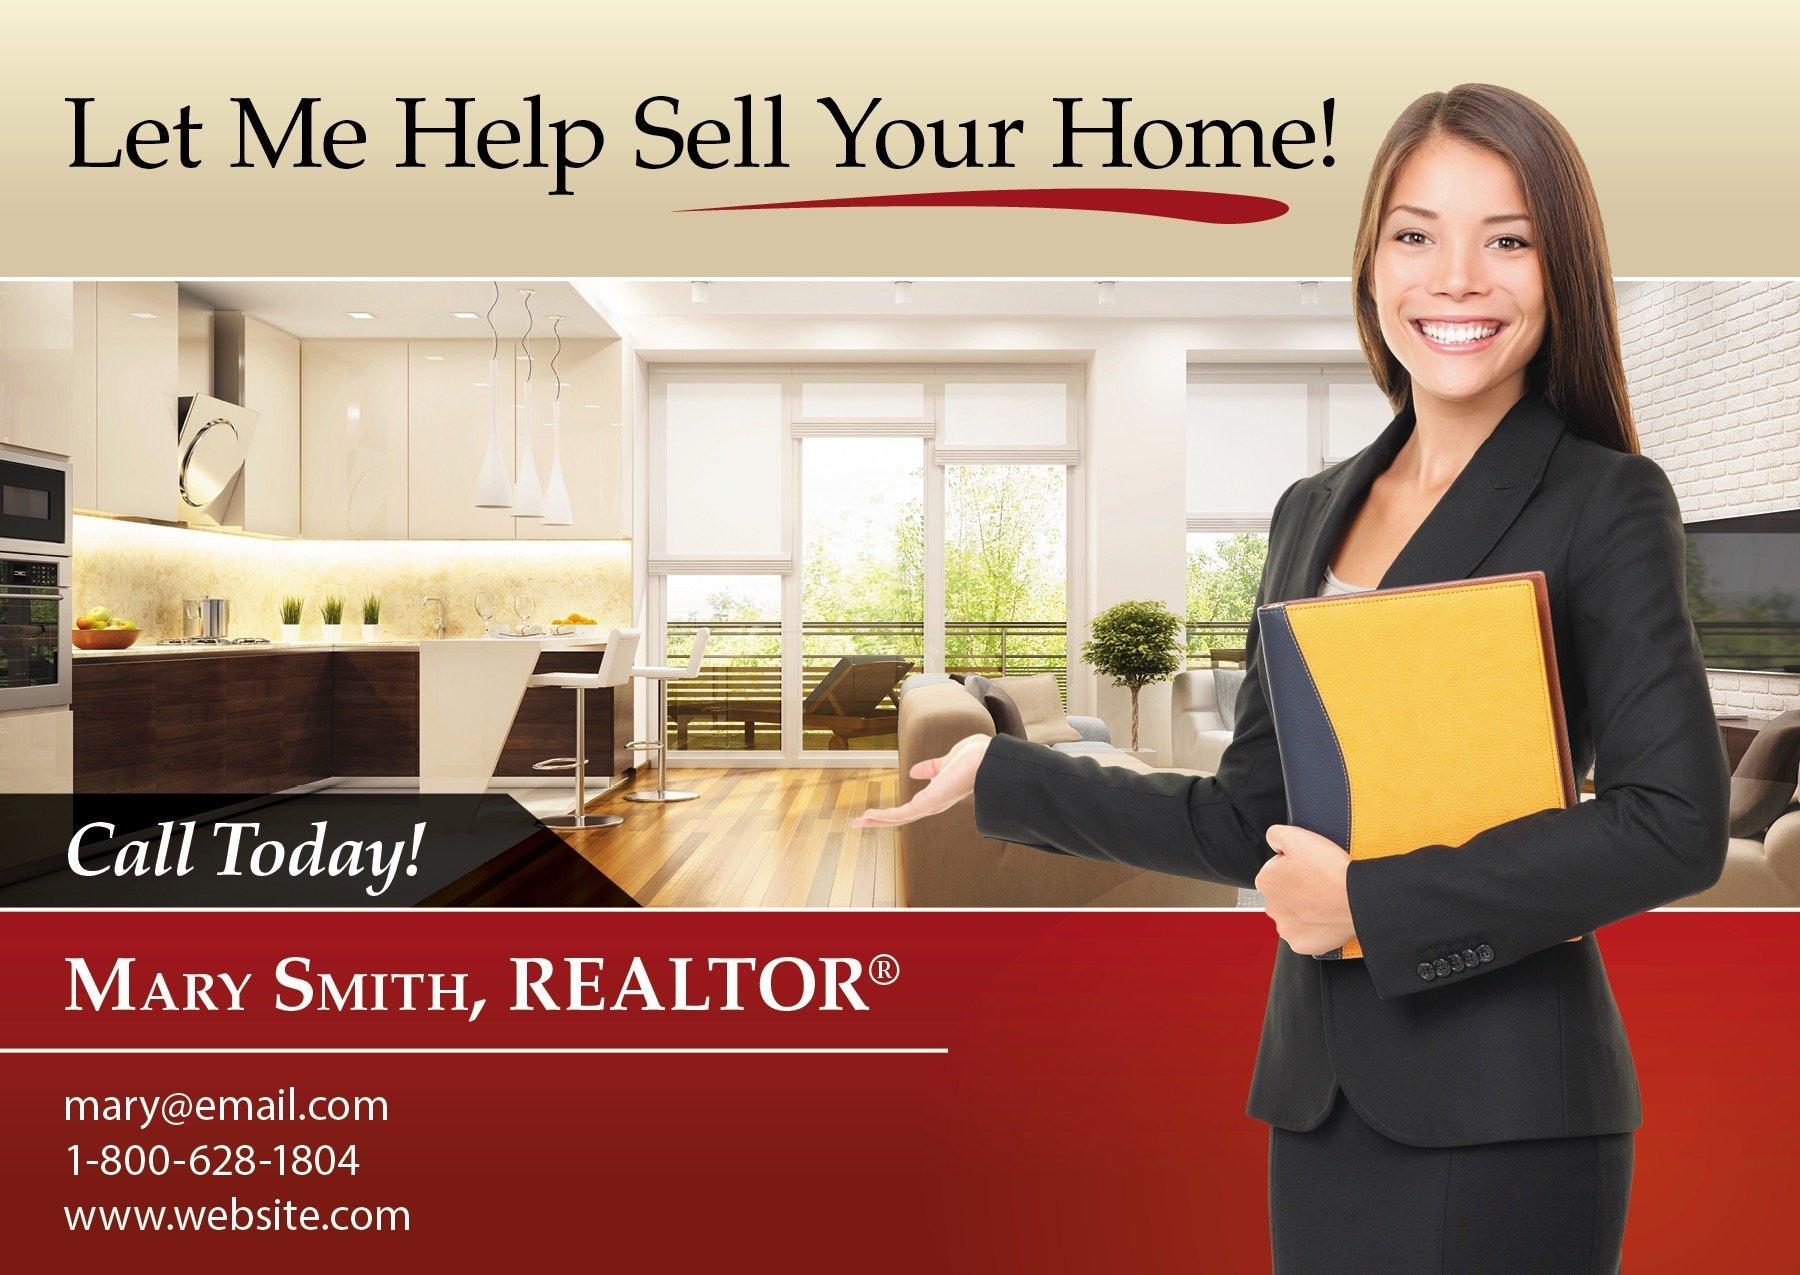 how much do real estate agentsmake